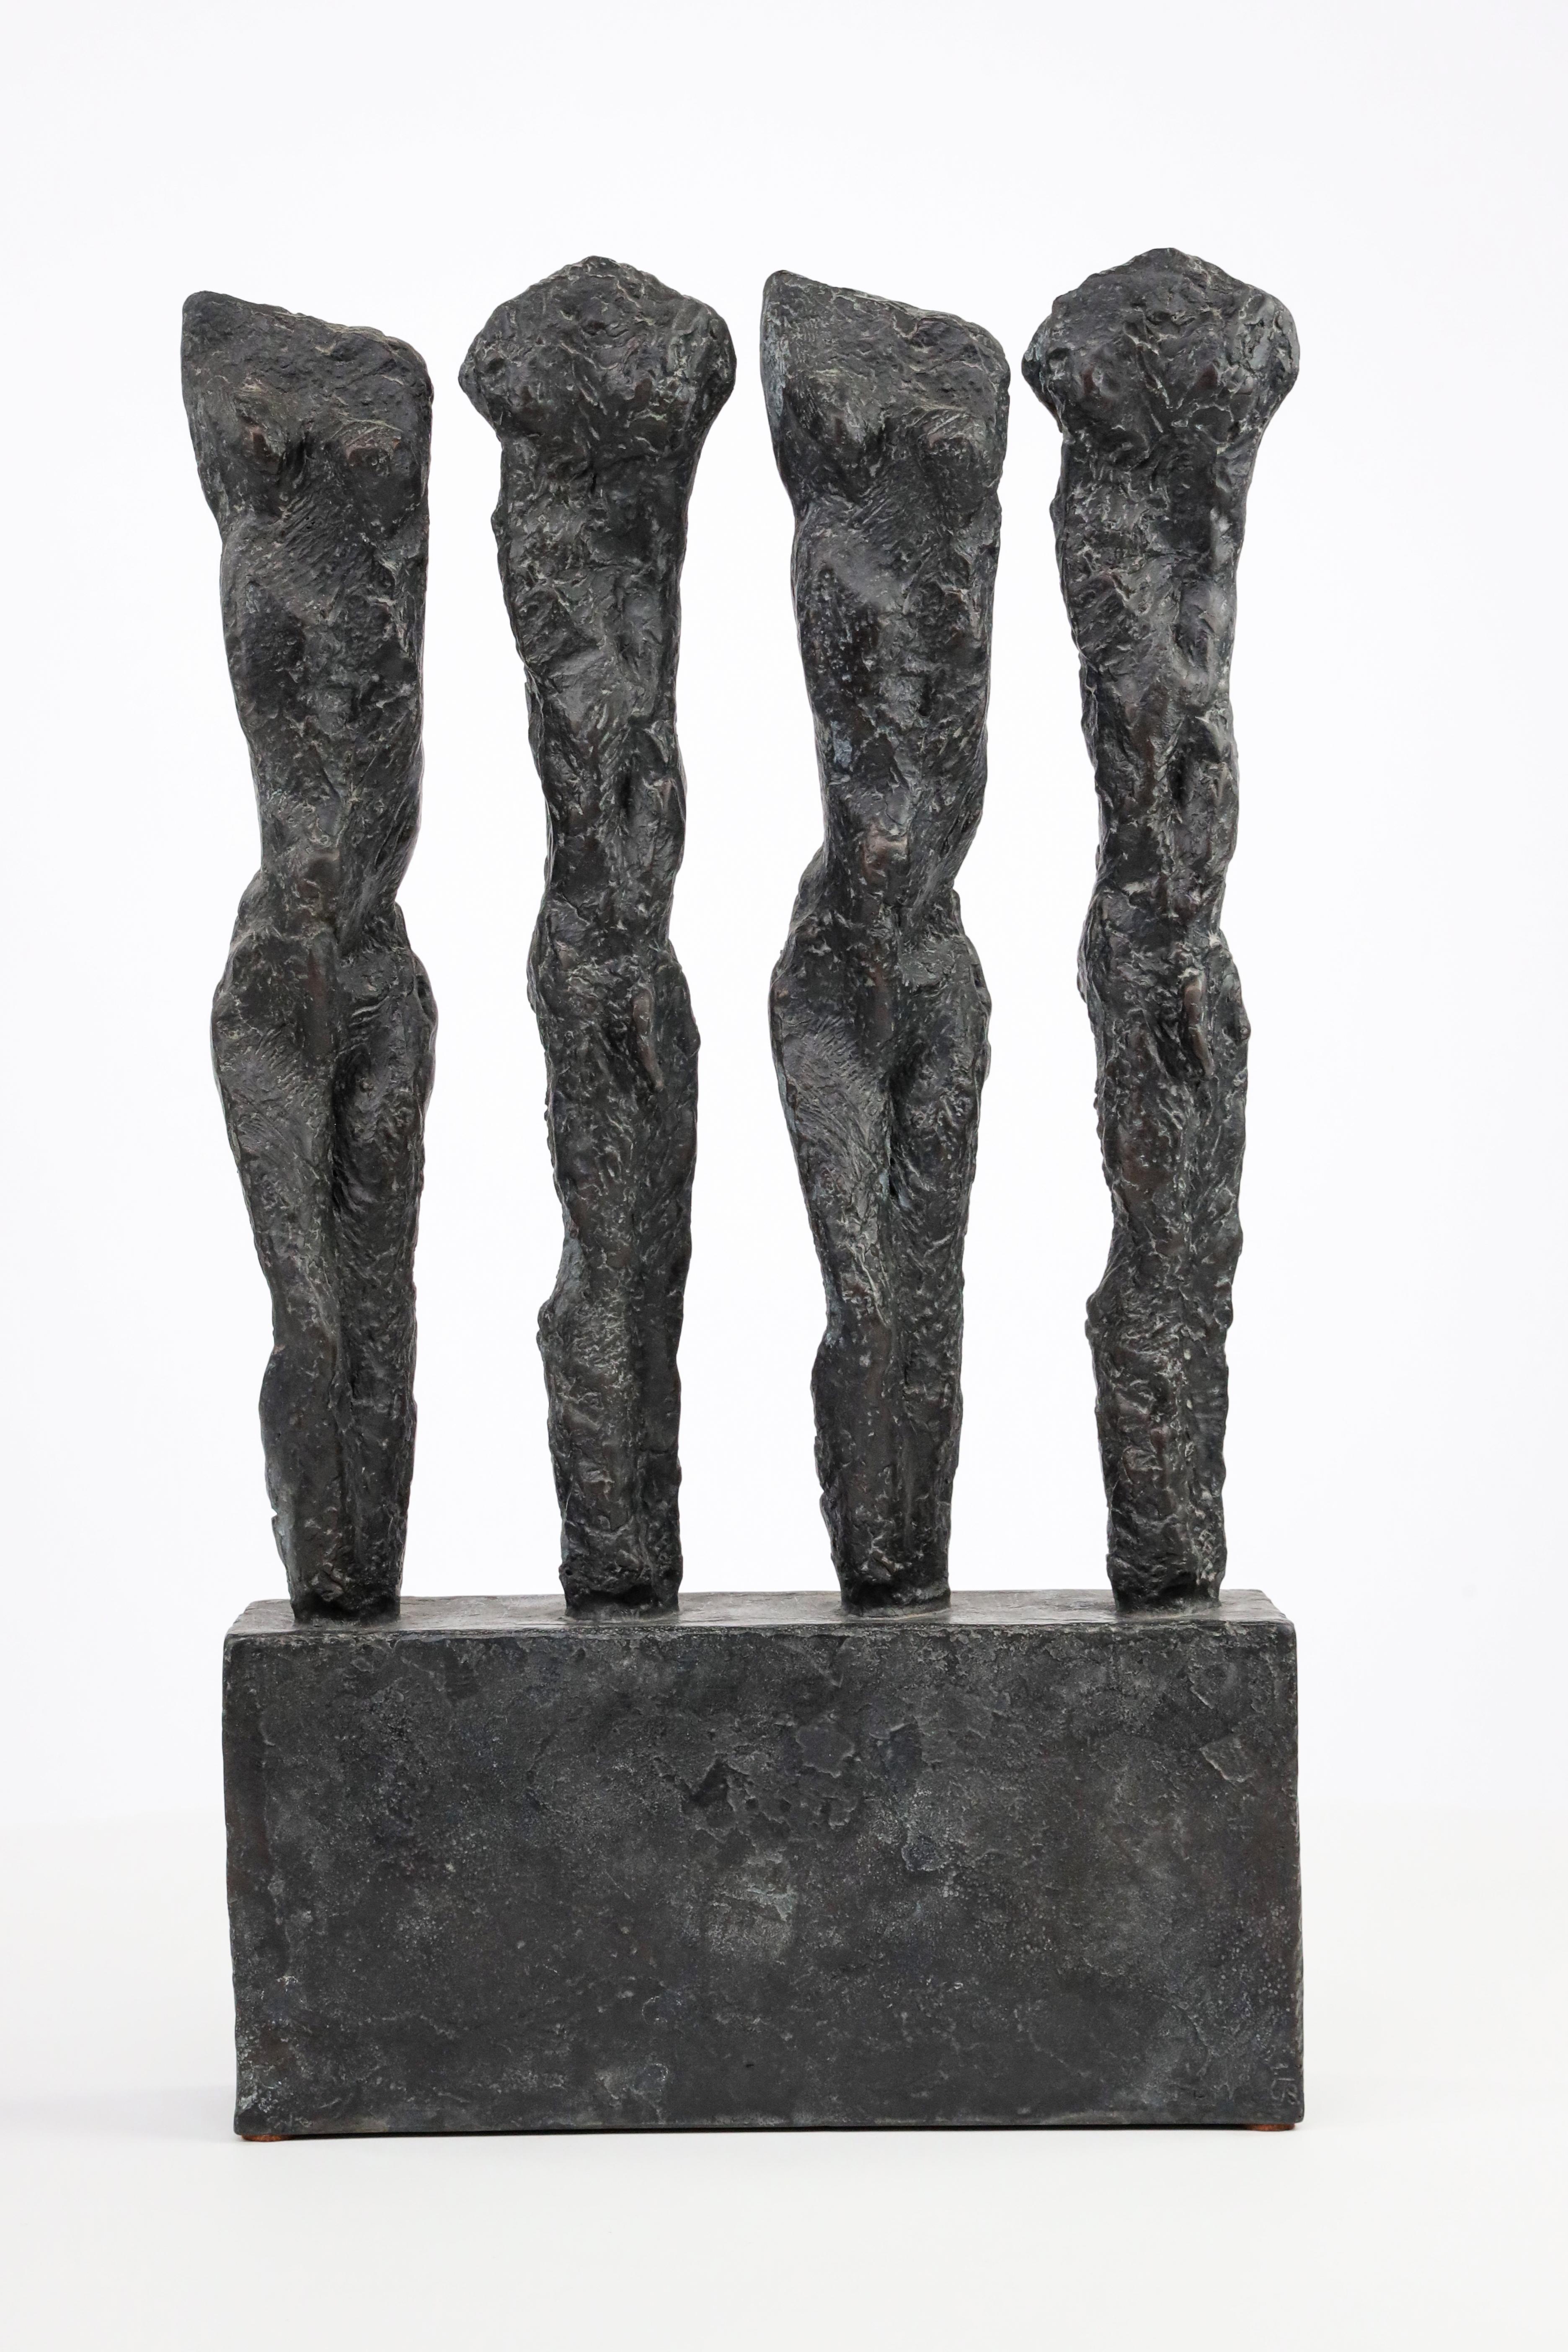 In Line is a bronze sculpture by French contemporary artist Martine Demal, dimensions are 43 × 25 × 7 cm (16.9 × 9.8 × 2.8 in). These dimensions include the base which measures 11 x 25 x 6 cm (4,3 x 9,8 x 2,4 in). 
The sculpture is signed and